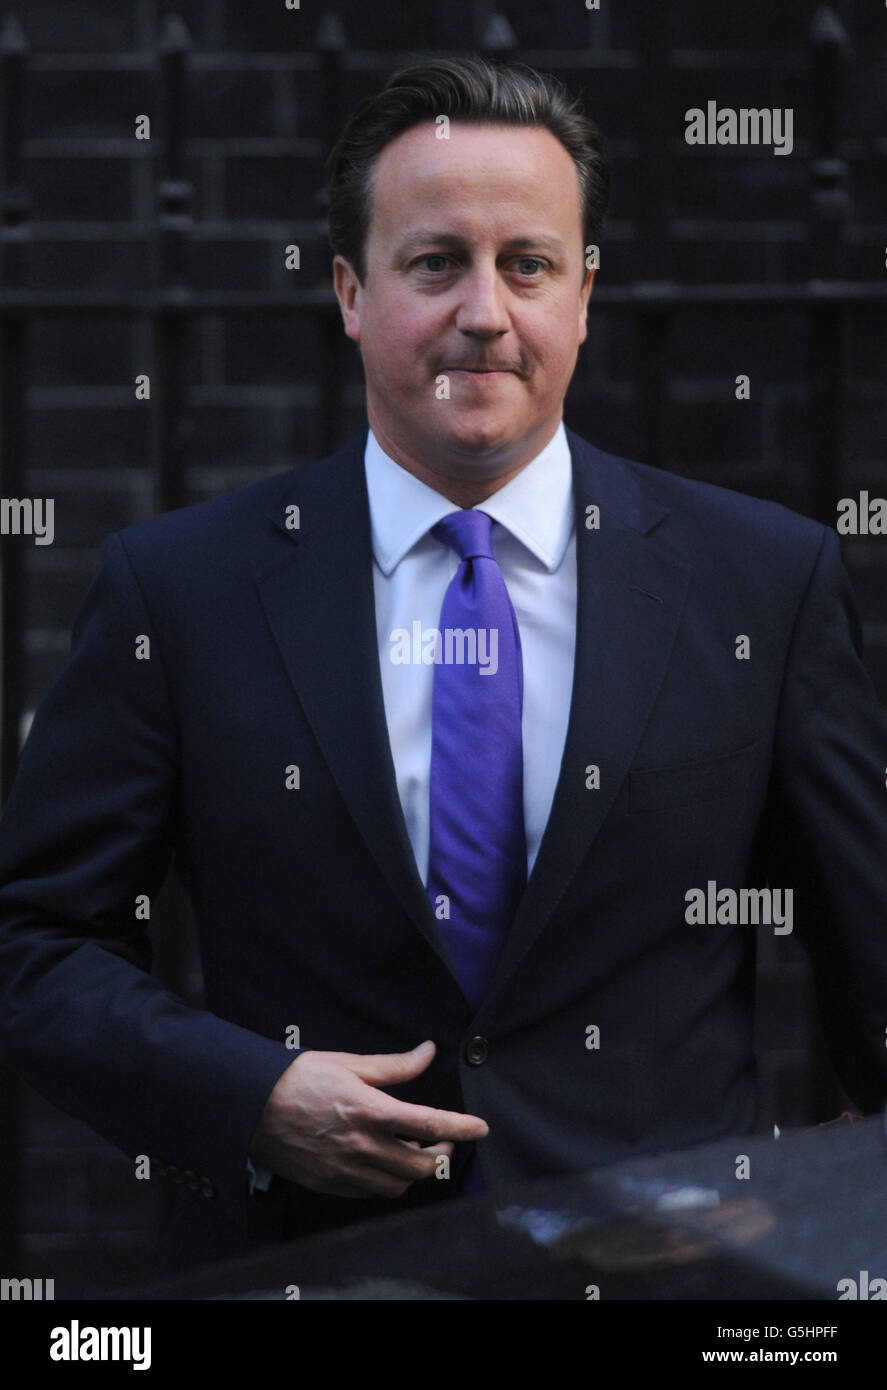 Cameron leaves for PMQs Stock Photo